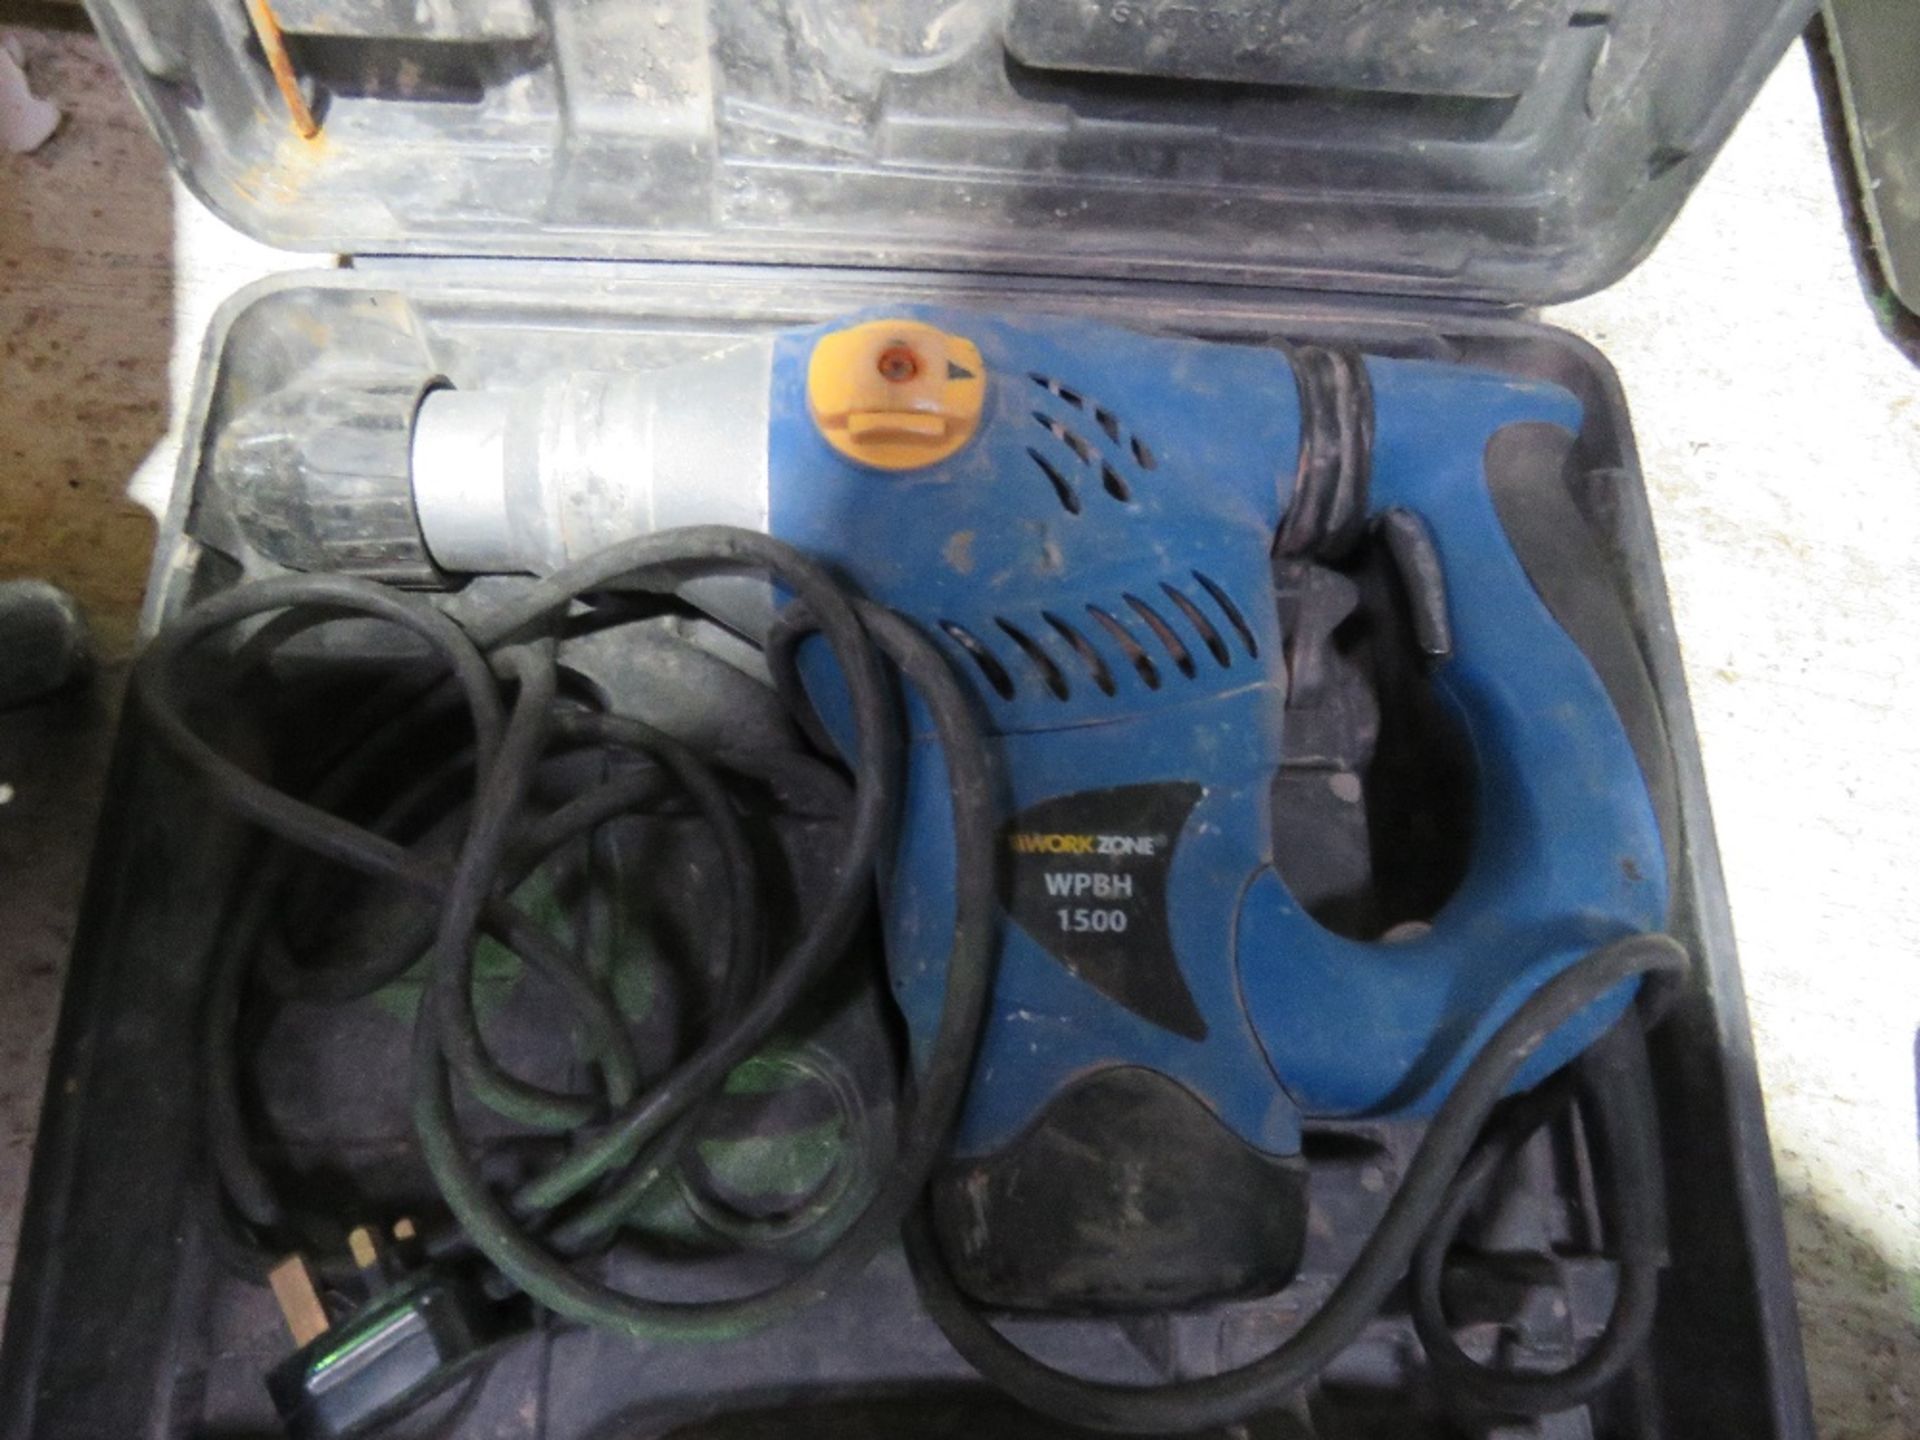 BREAKER 240VOLT PLUS A JIG SAW AND DEWALT RADIO.....THIS LOT IS SOLD UNDER THE AUCTIONEERS MARGIN SC - Image 3 of 4